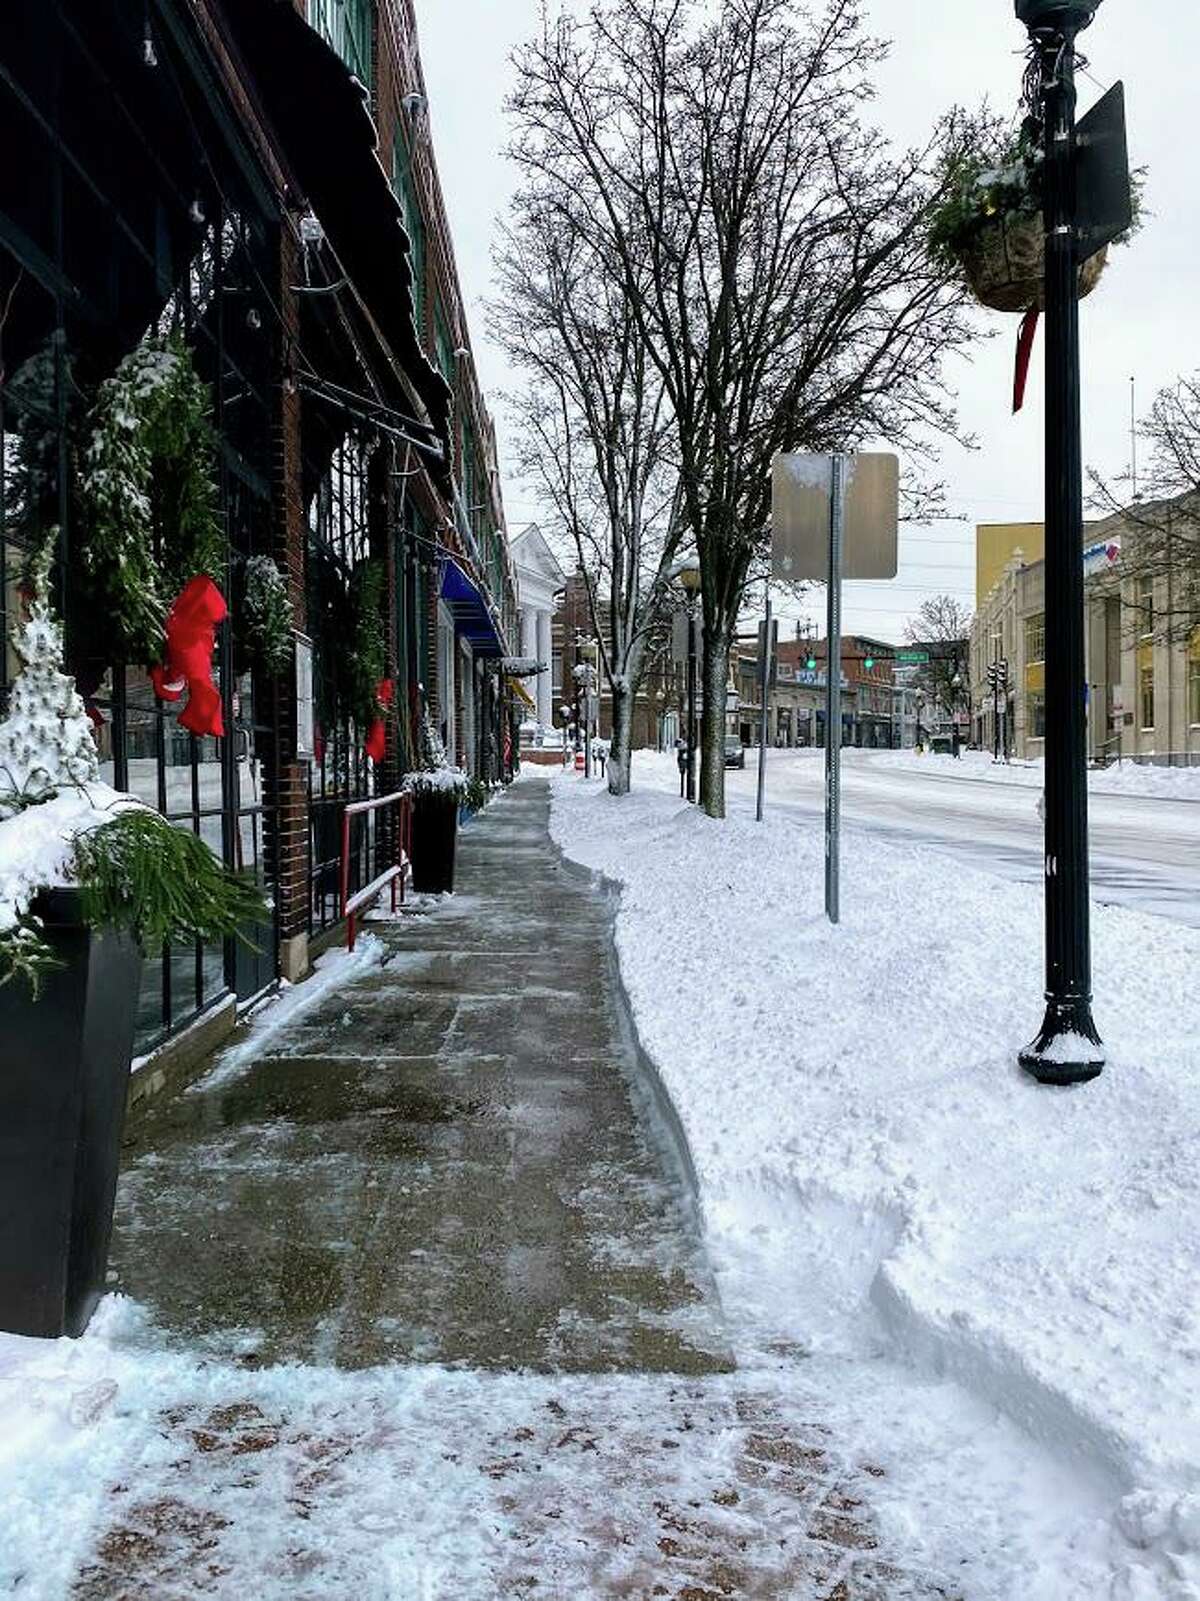 Snow lined North Main Street in Norwalk, Conn. on Dec. 17, 2020 after the area was hit with a storm that brought over 5 inches of snow.